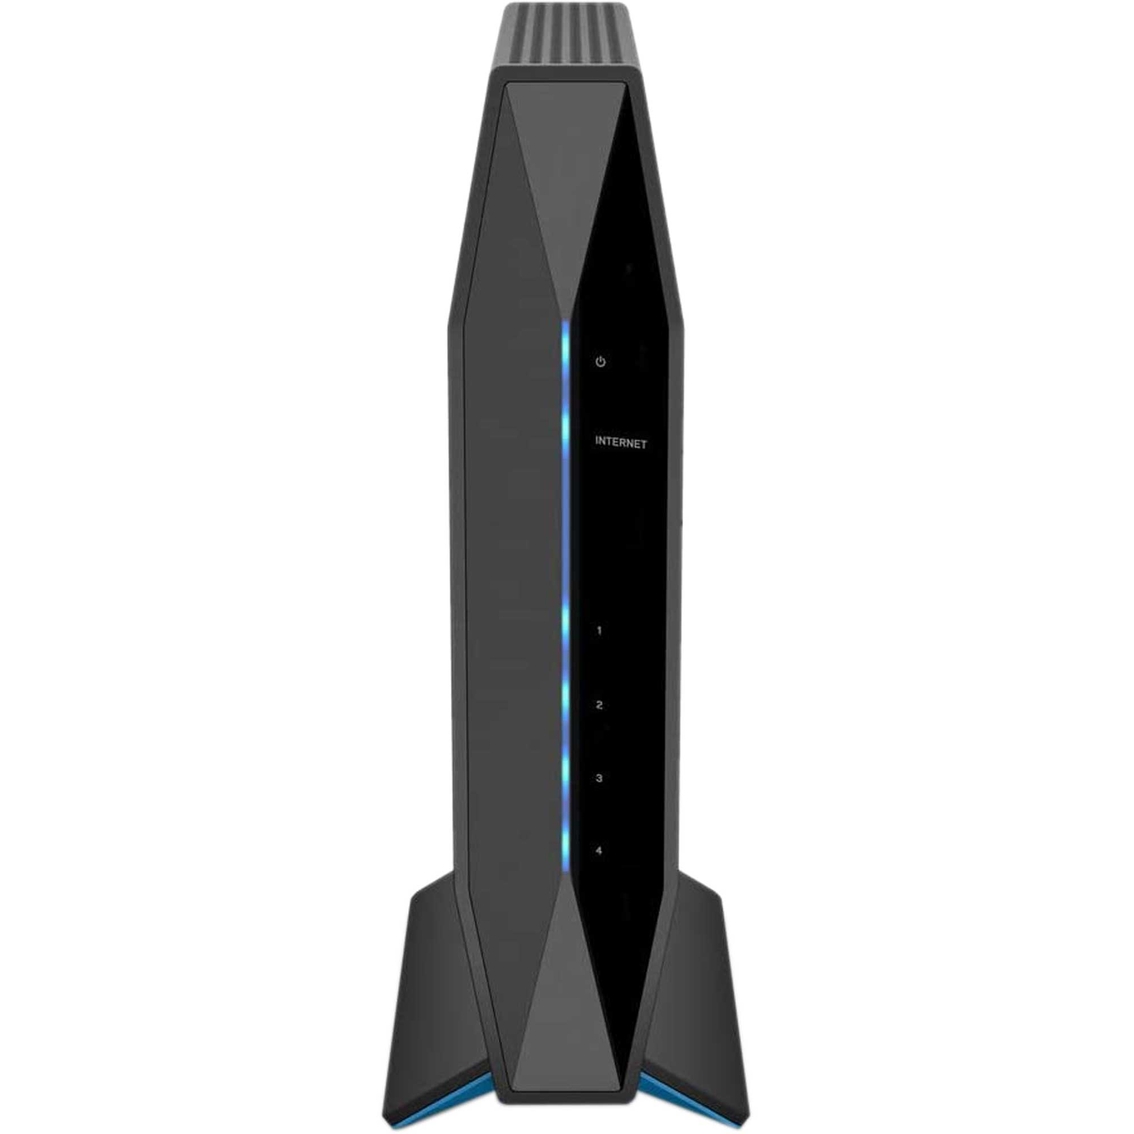 Linksys Dual Band AX3200 WiFi 6 Router (E8450) - Image 2 of 5